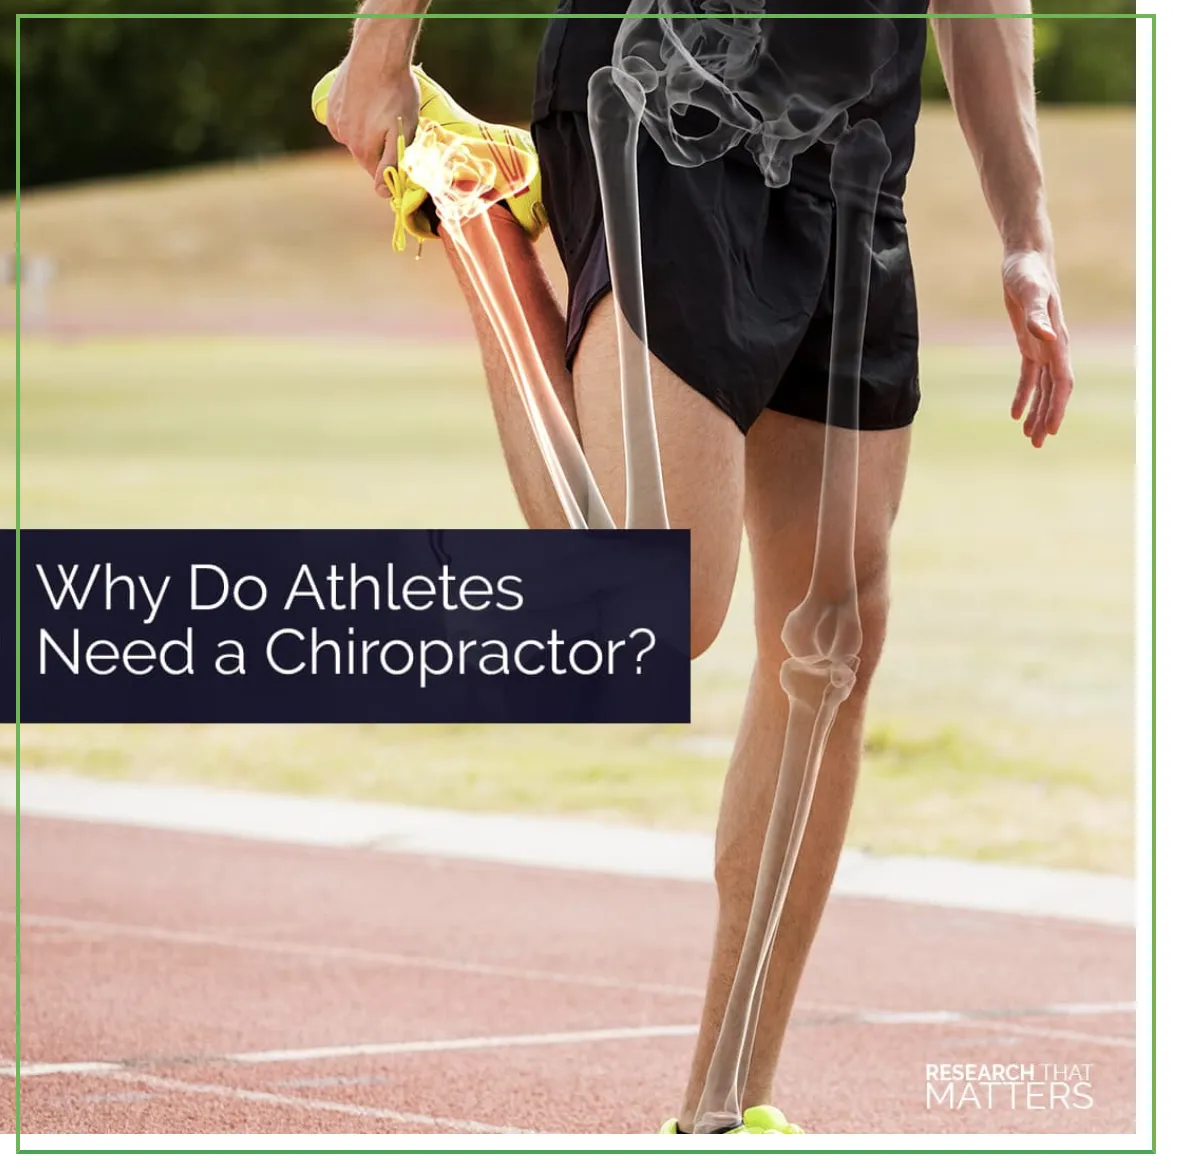 Why Do Athletes Need A Chiropractor?